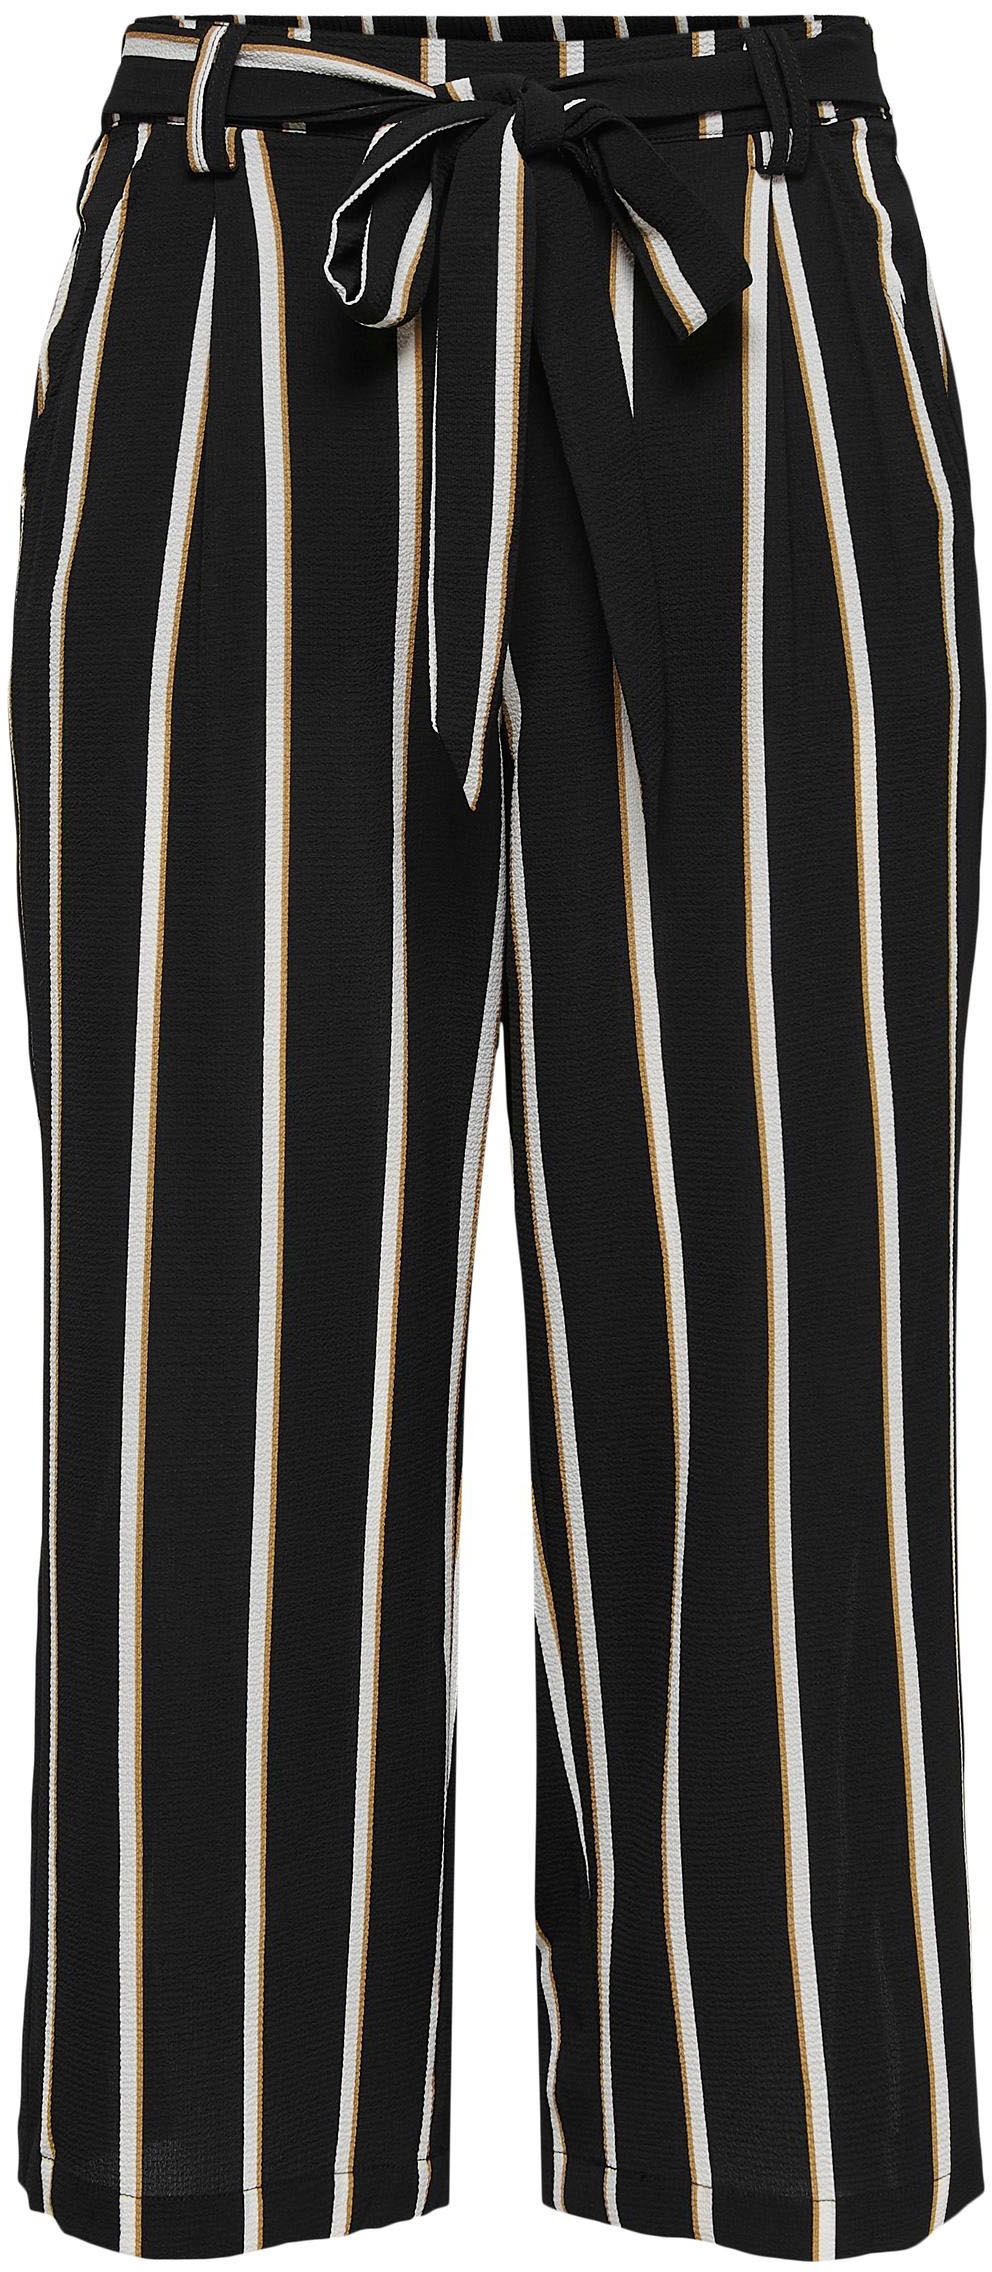 ONLY Palazzohose »ONLWINNER PALAZZO bei PANT OTTO in PTM«, uni NOOS Design oder gestreiftem CULOTTE